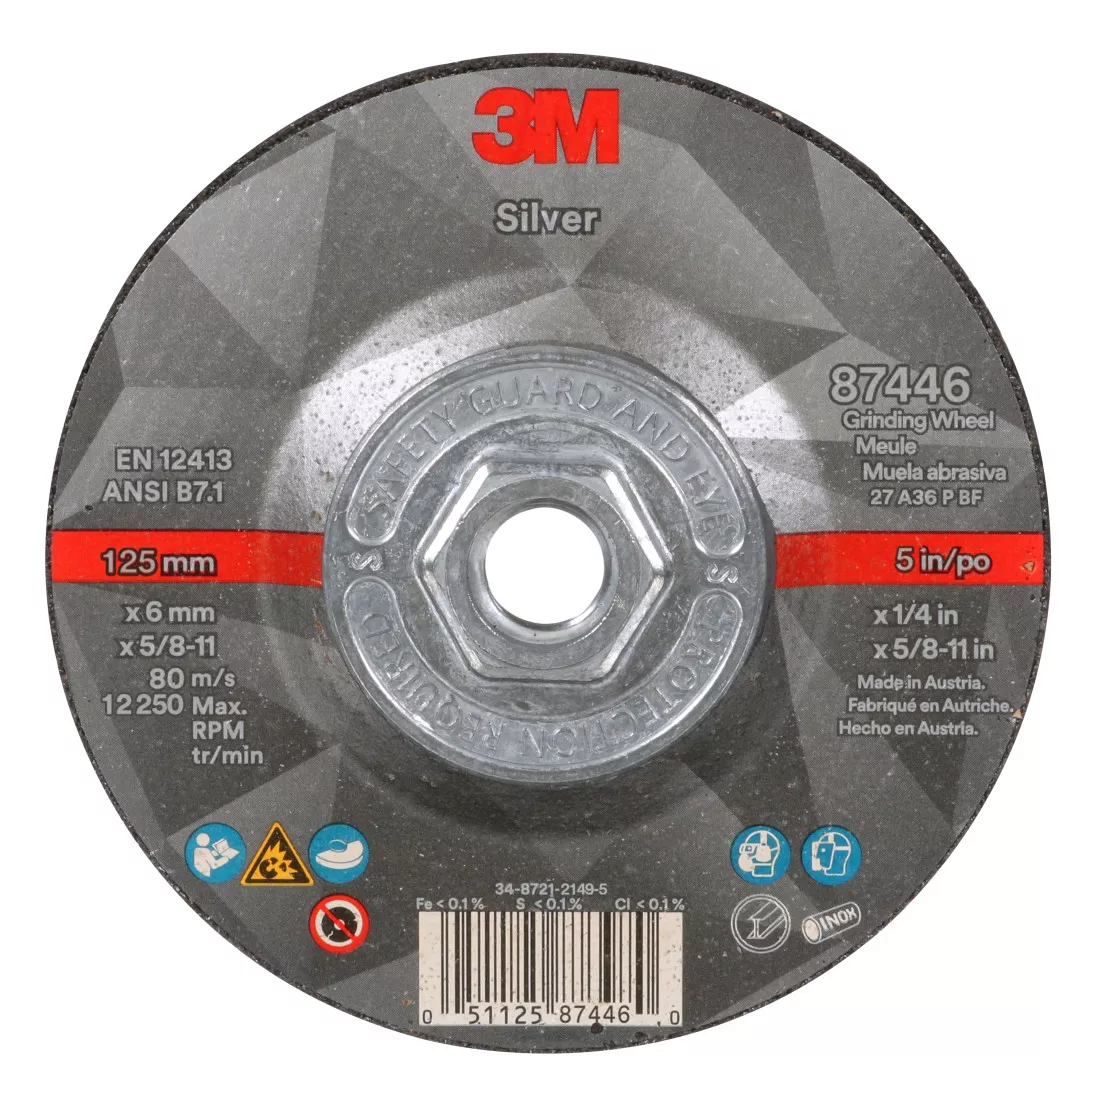 3M™ Silver Depressed Center Grinding Wheel, 87446, T27 Quick Change, 5 x
1/4 x 5/8 in-11 in, 10/Inner, 20 ea/Case